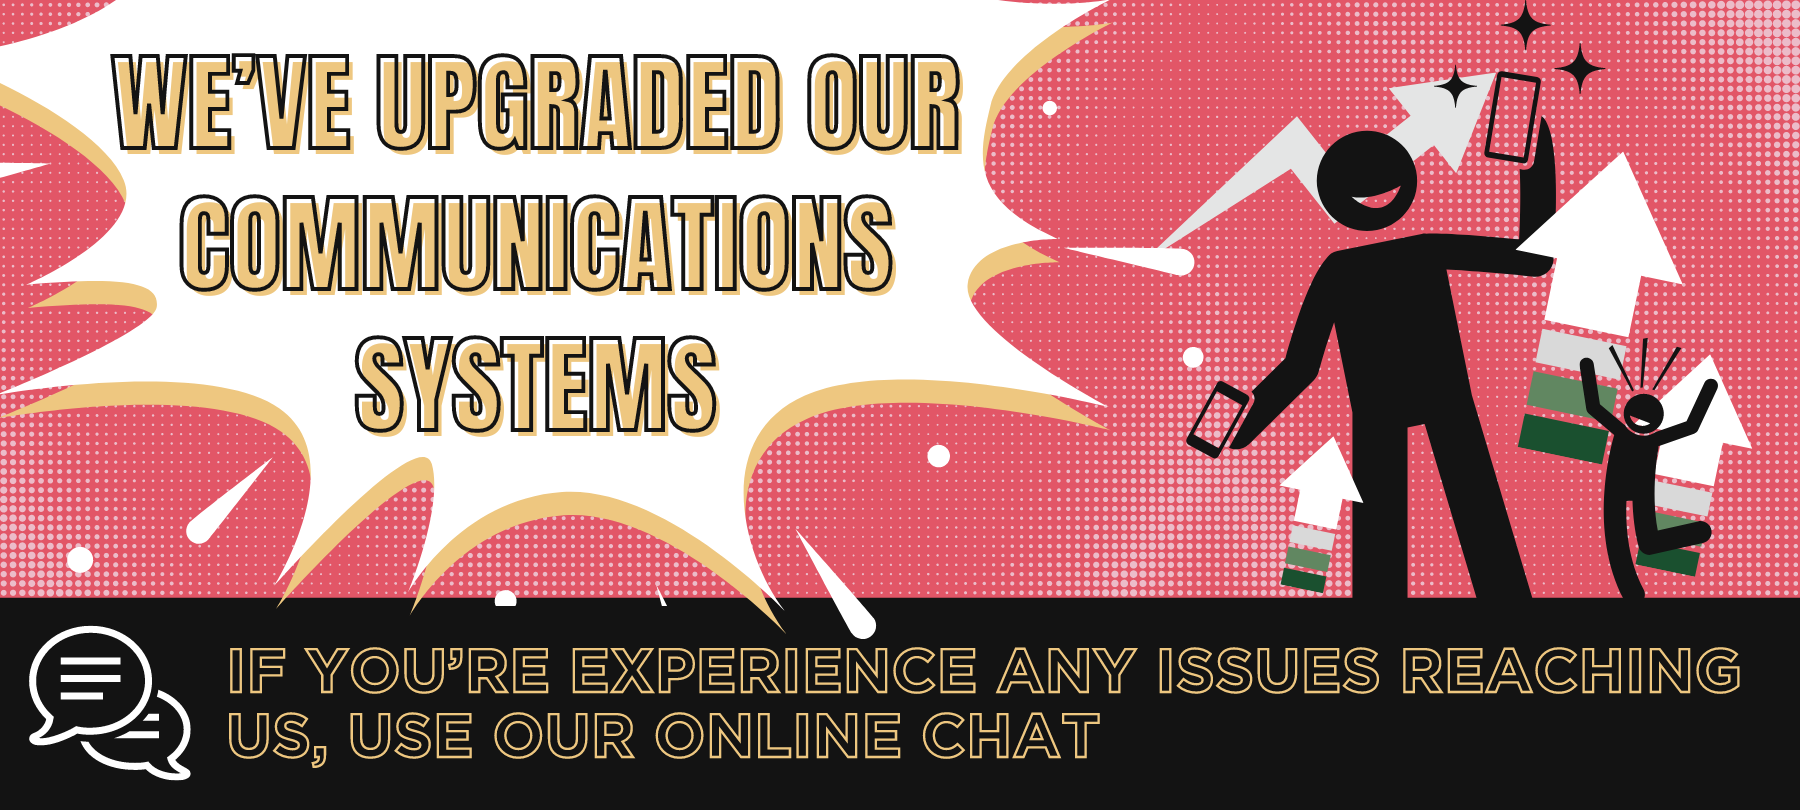 We've Upgraded Our Communication Systems. If you experience any issues calling us, please use our online chat to reach us.